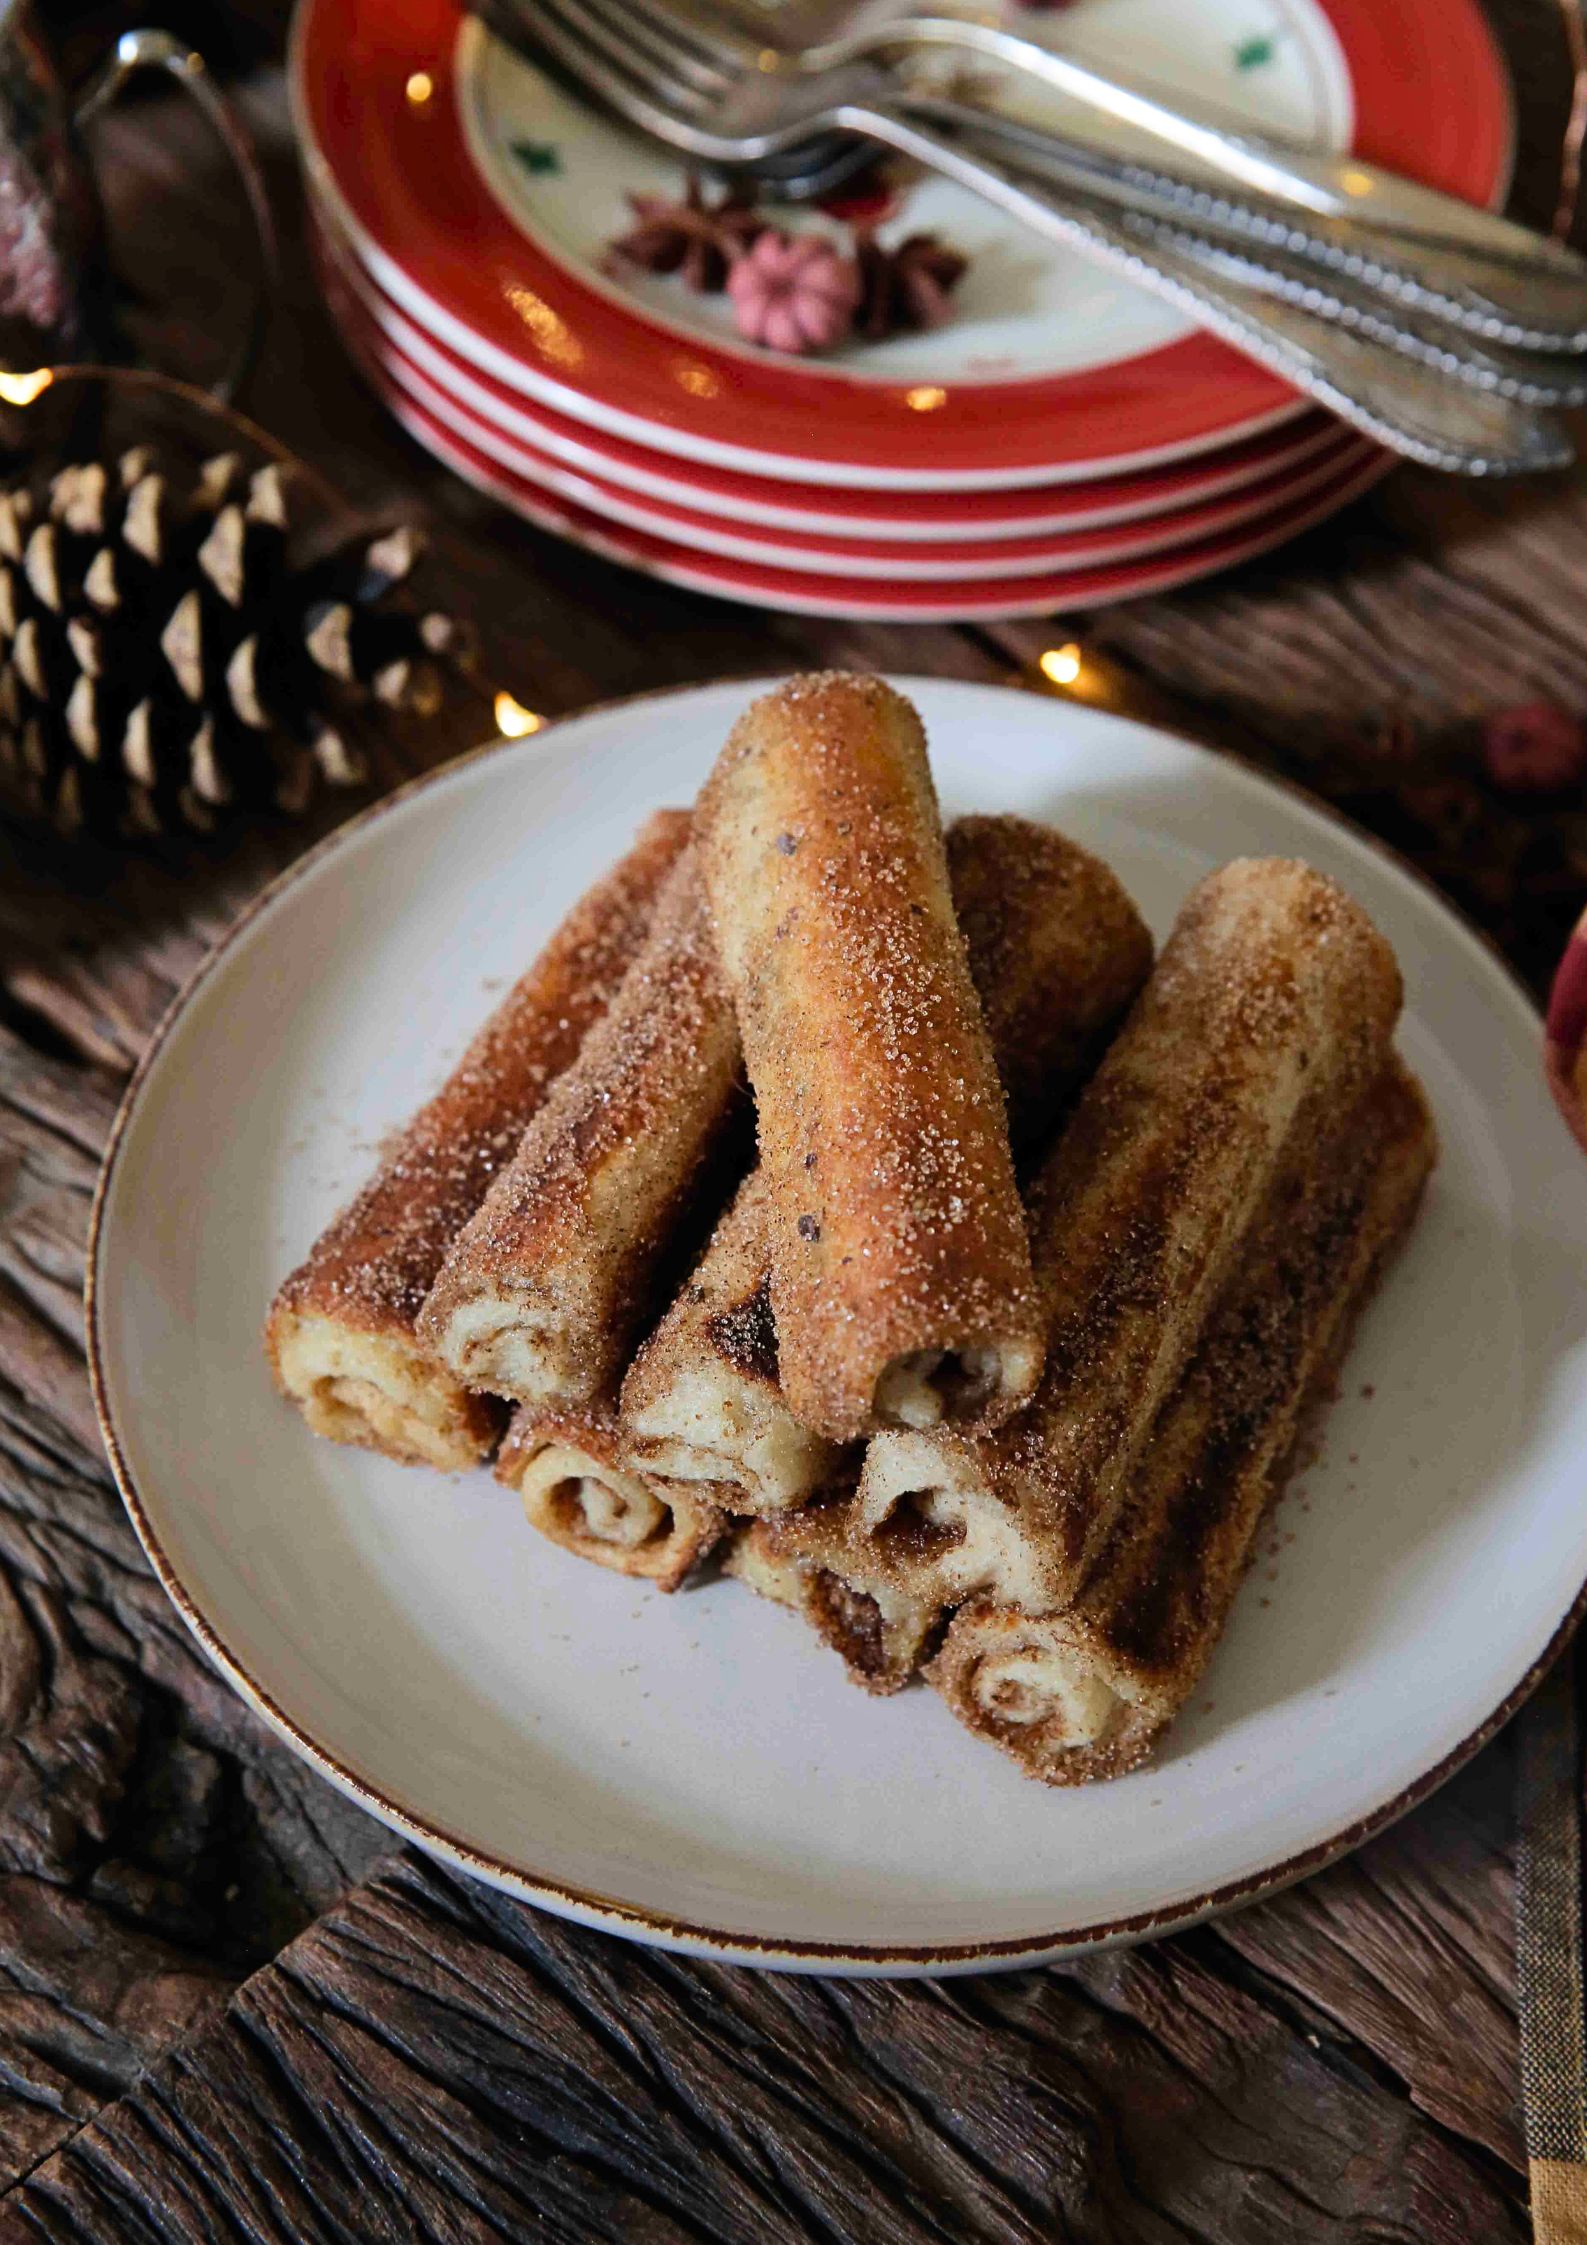 All the sugary, buttery flavours of French toast - in a roll! These easy to make cinnamon toast roll ups are a decadent treat, perfect for a weekend or Christmas breakfast or just when you fancy spoiling yourself. Recipe on thecookandhim.com #frenchtoast #cinnamontoast #christmasbreakfastideas #christmasbreakfast #veganchristmas